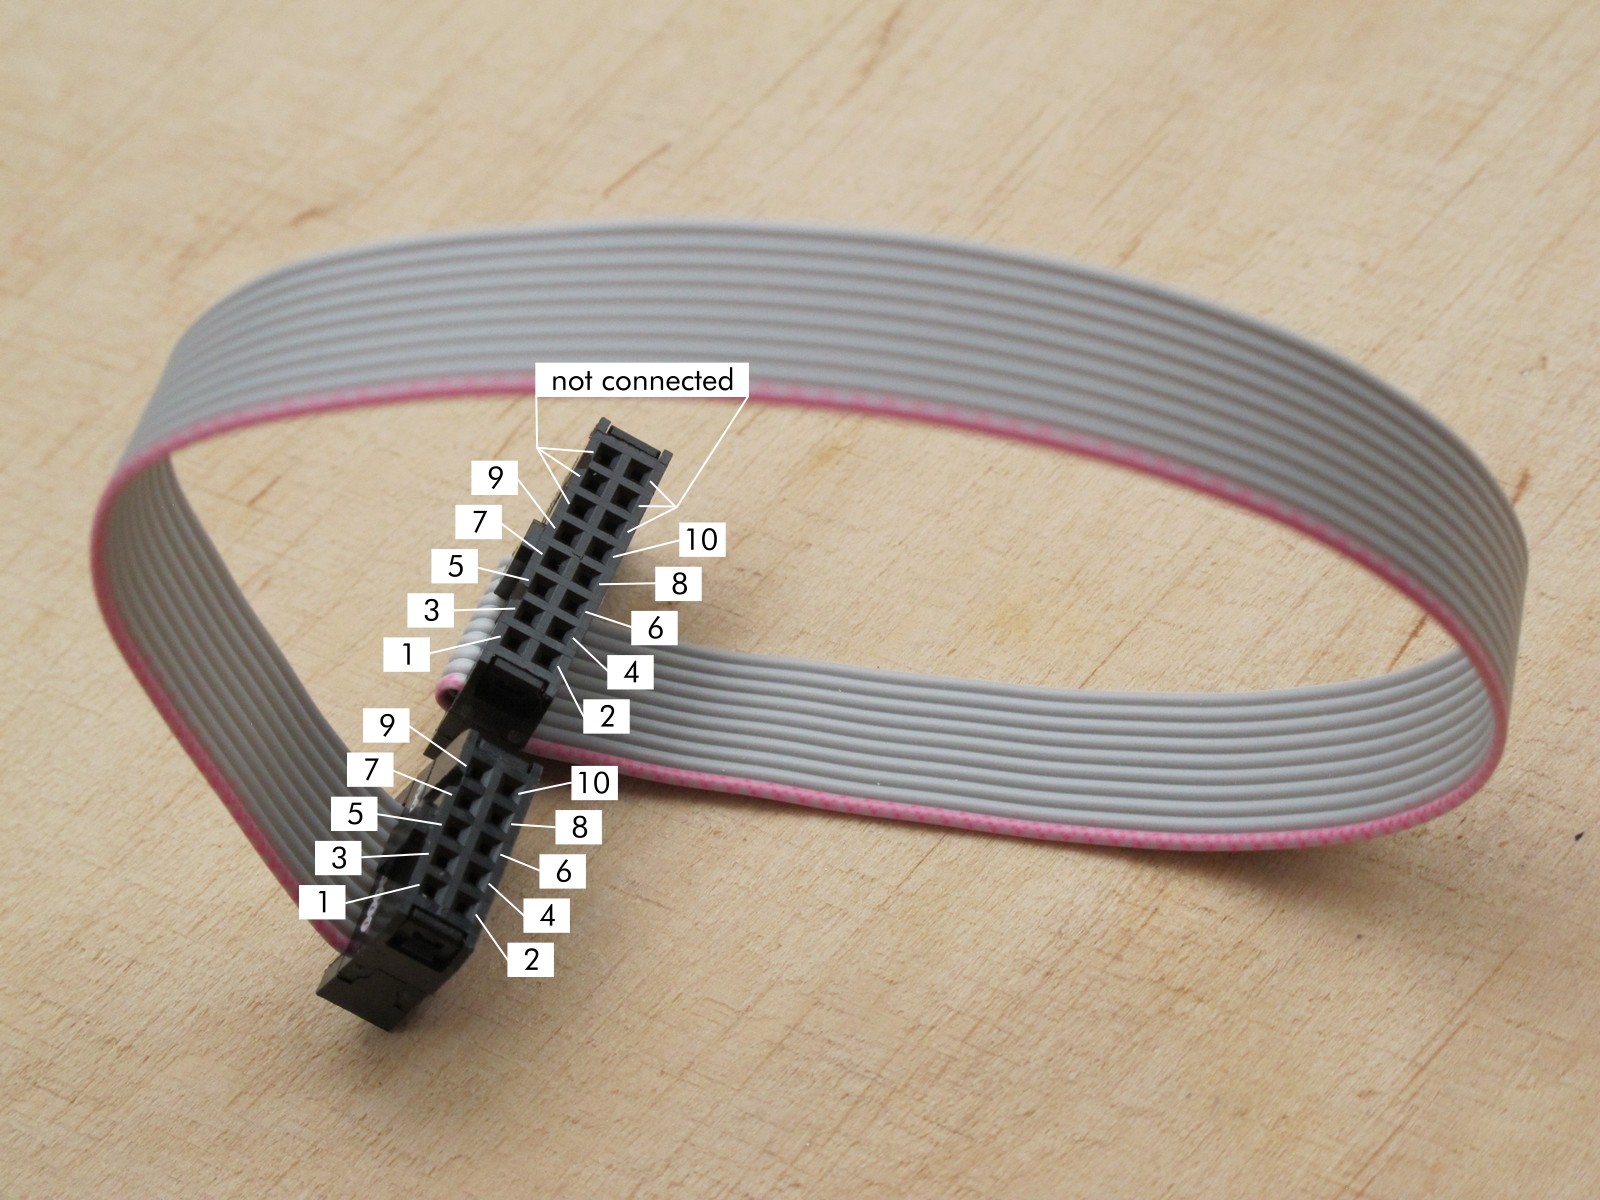 Ribbon cable with marked pins